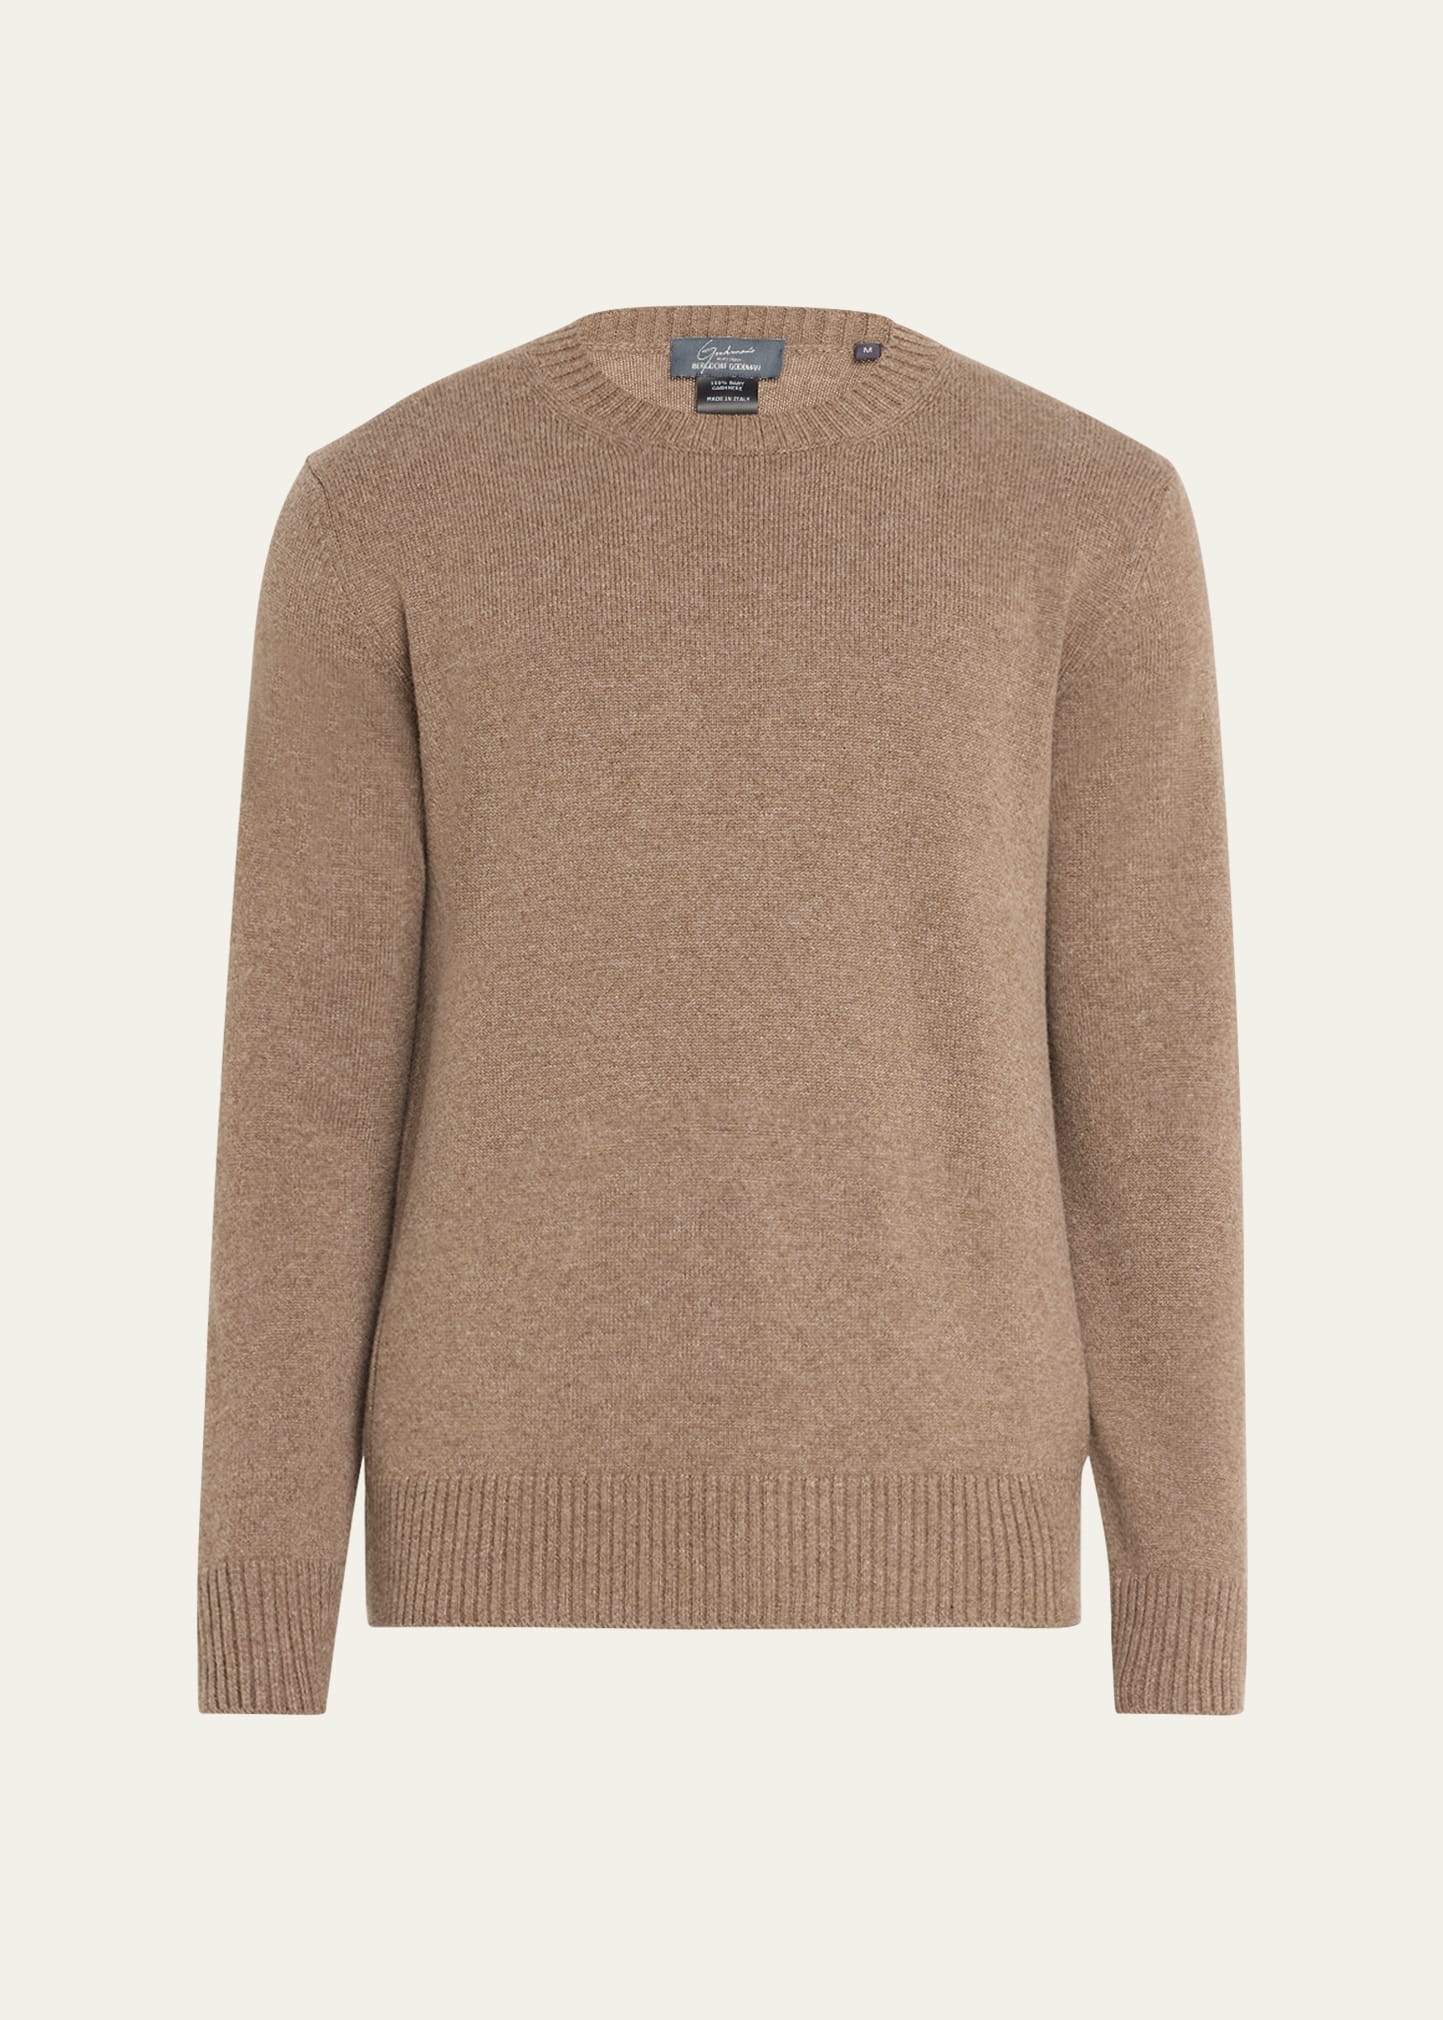 Goodman's Men's Rib Baby Cashmere Pullover In Brown